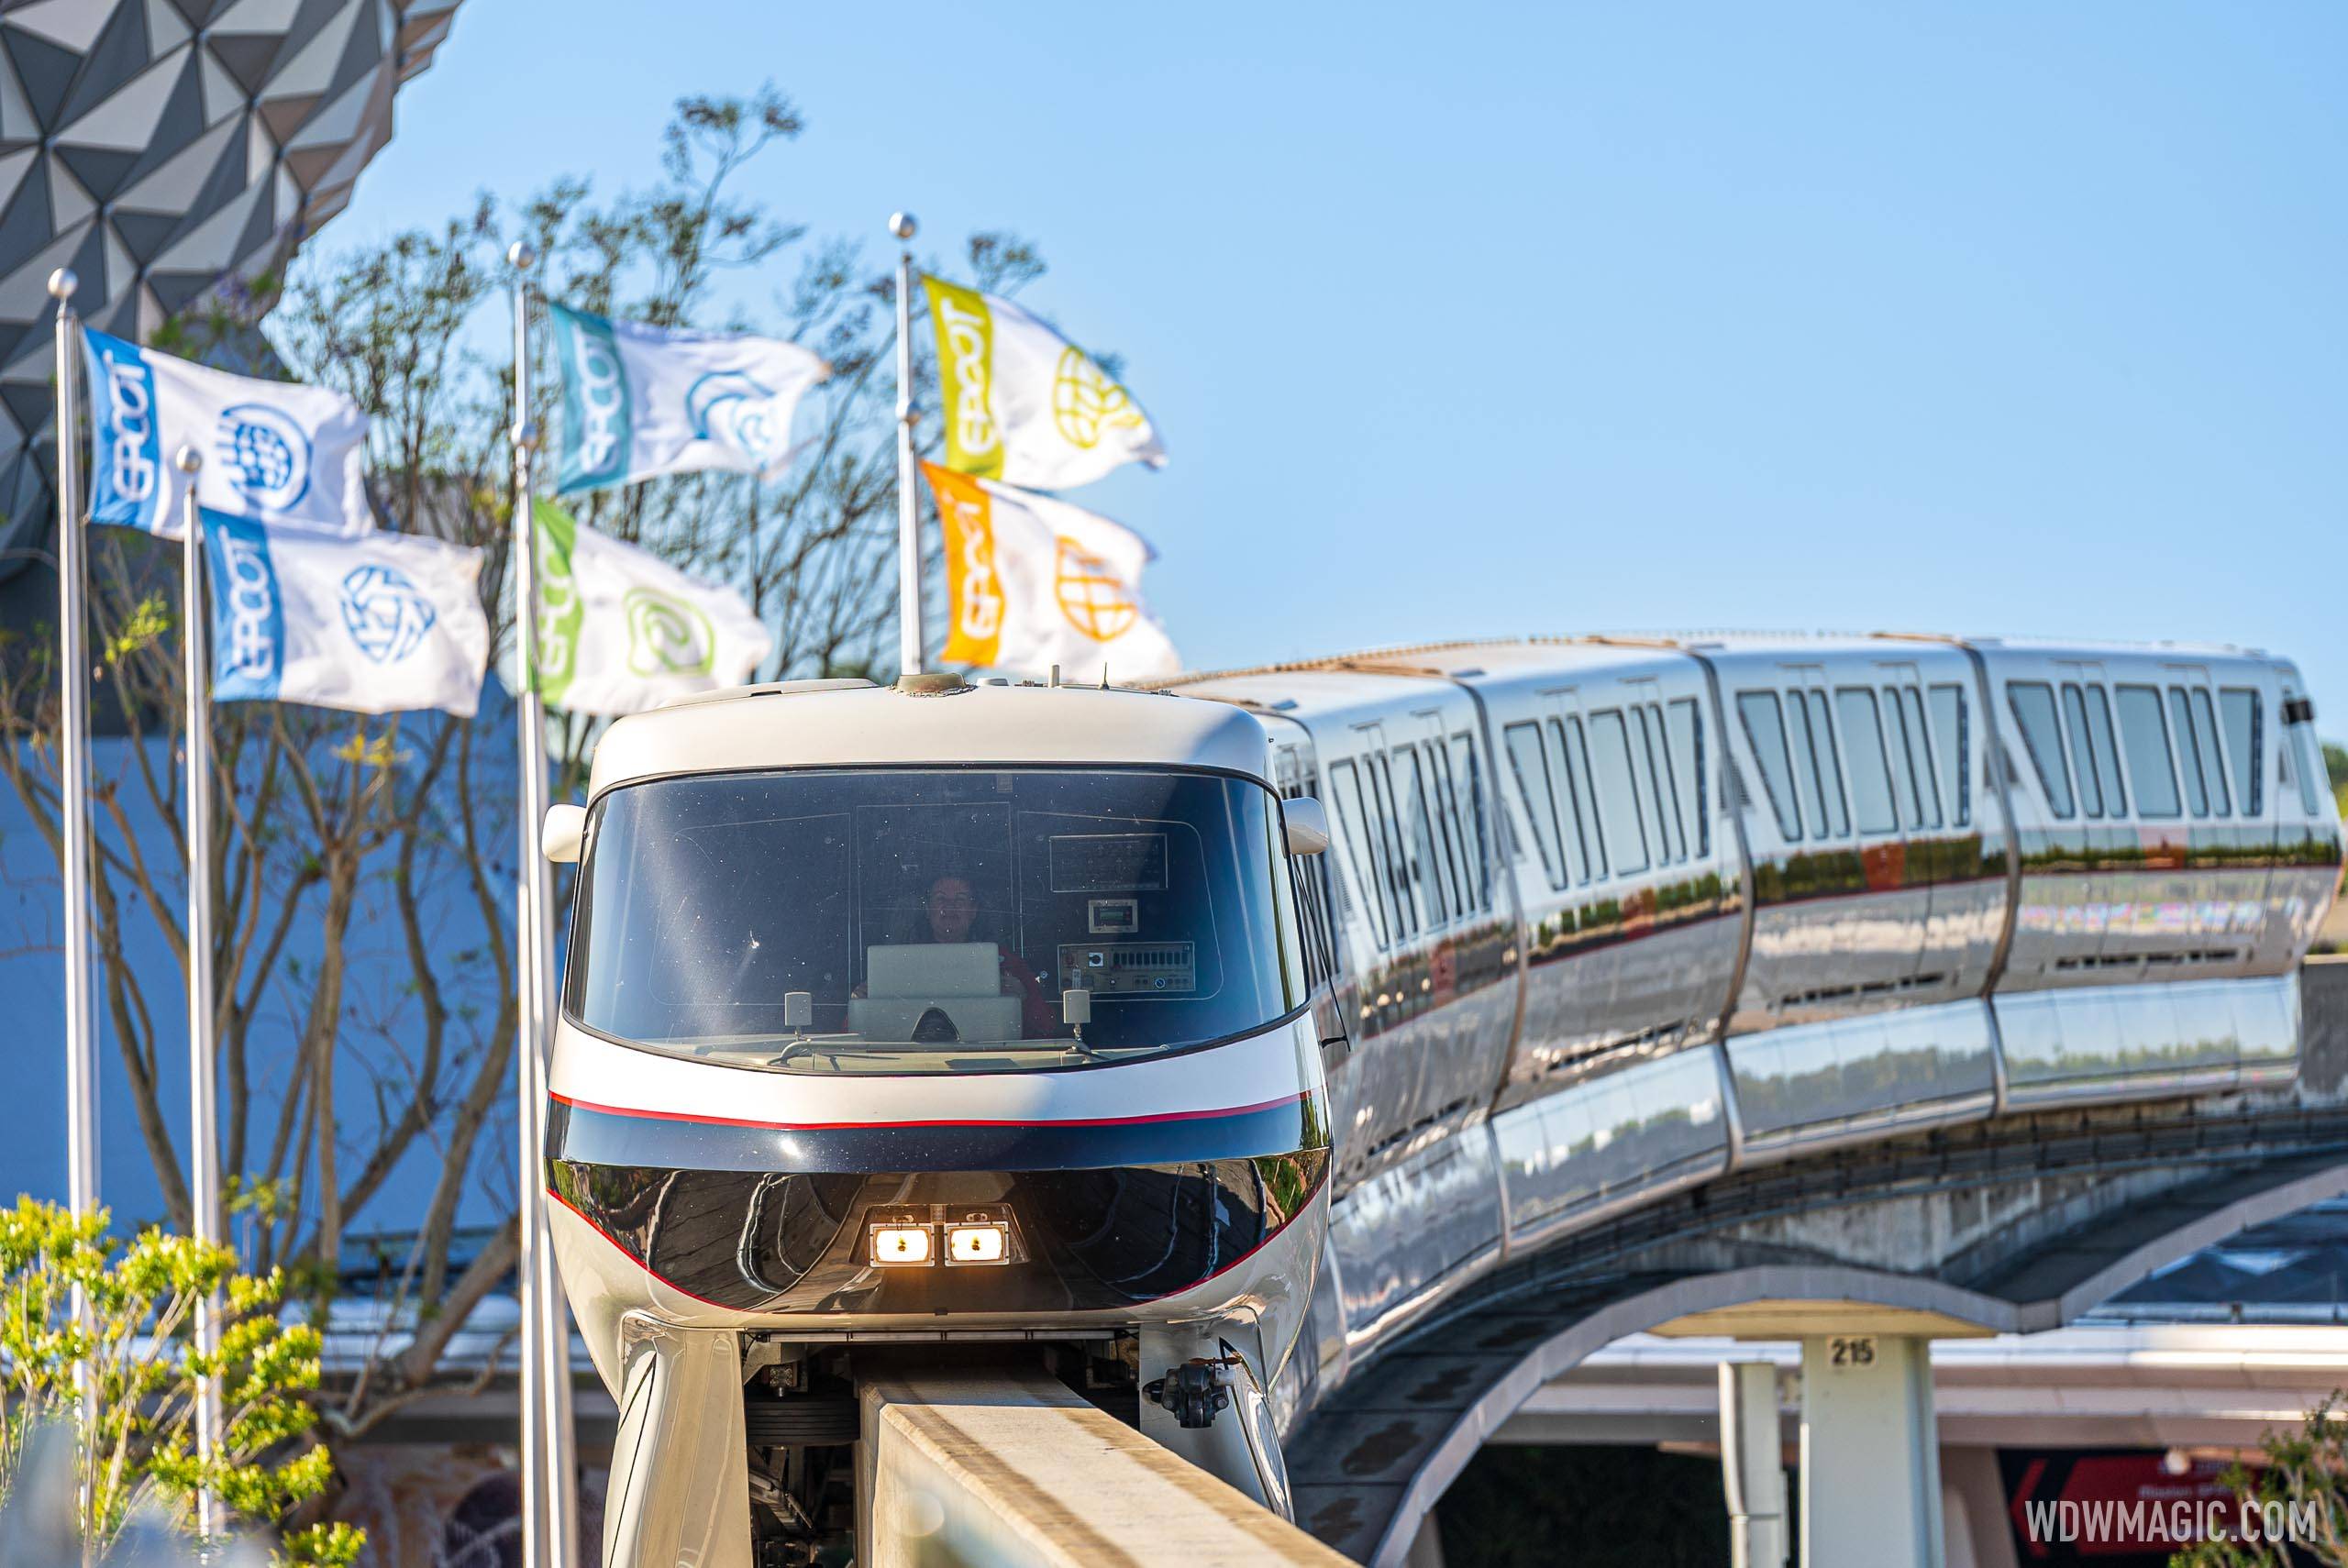 Monorail Teal now in service